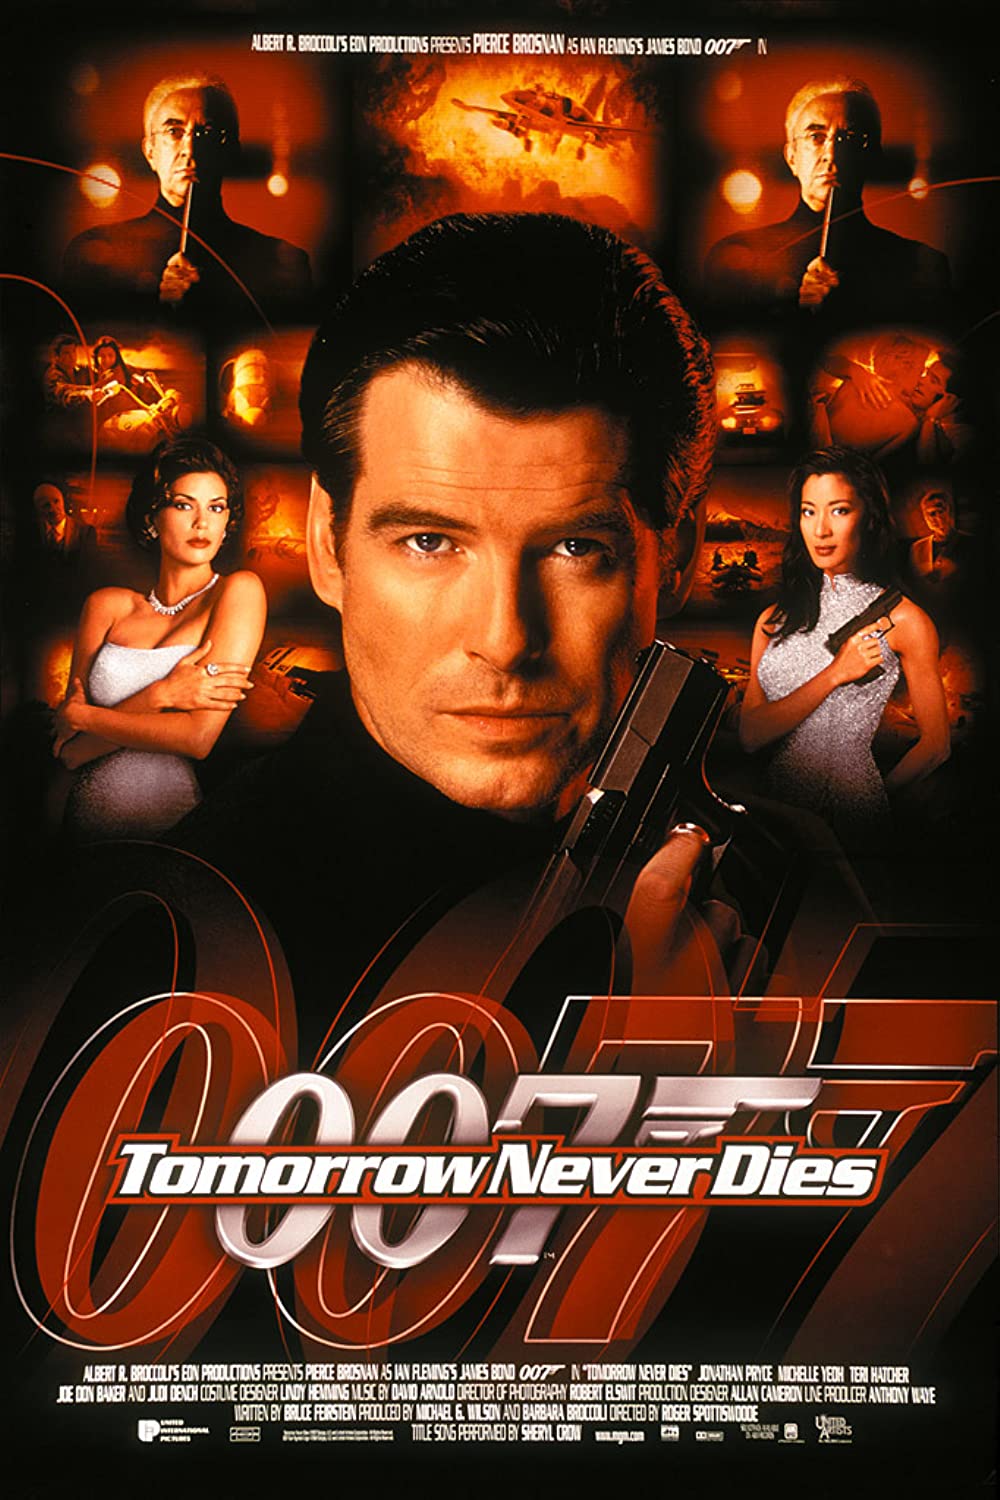 FULL MOVIE: Tomorrow Never Dies (1997) [Action]